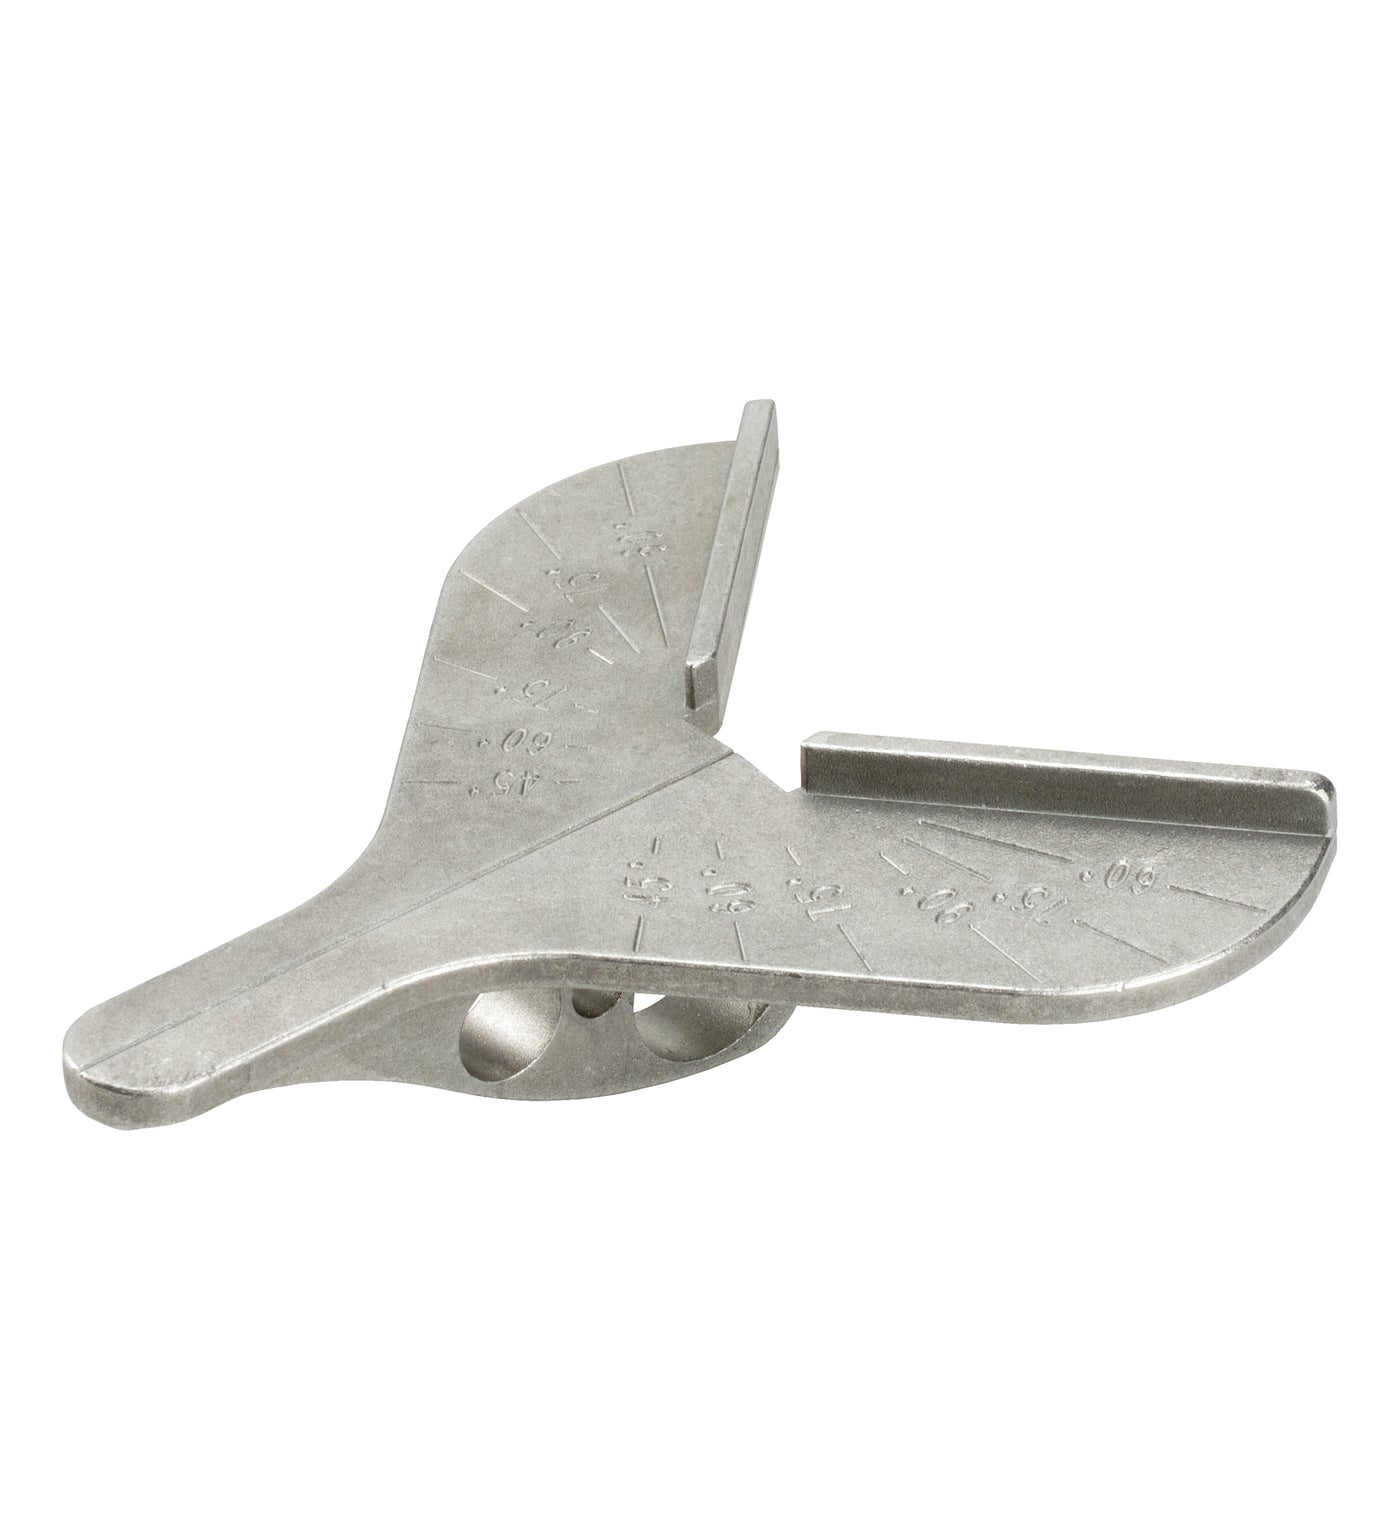 Anvil for LO 3104, 3104/HU and 3804 Industrial Cutters